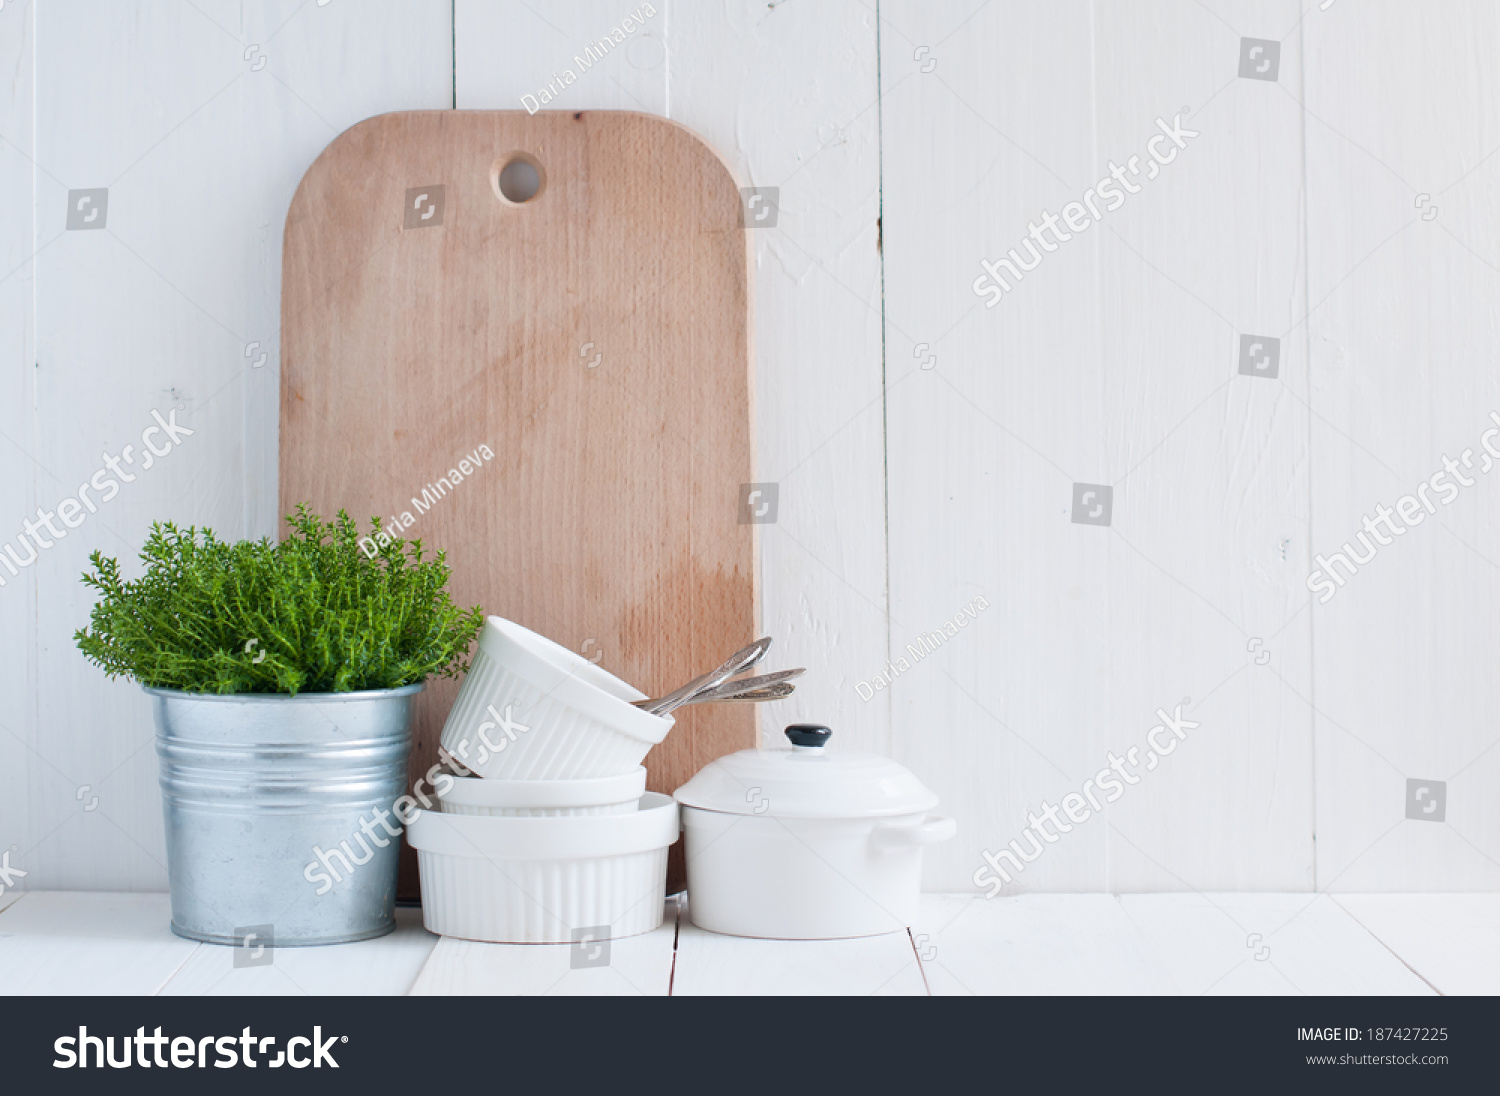 Cottage life, country kitchen decoration: a house plant in a metal pot, kitchen pottery, utensils and napkins on white painted board. Cozy home country life background is. #187427225